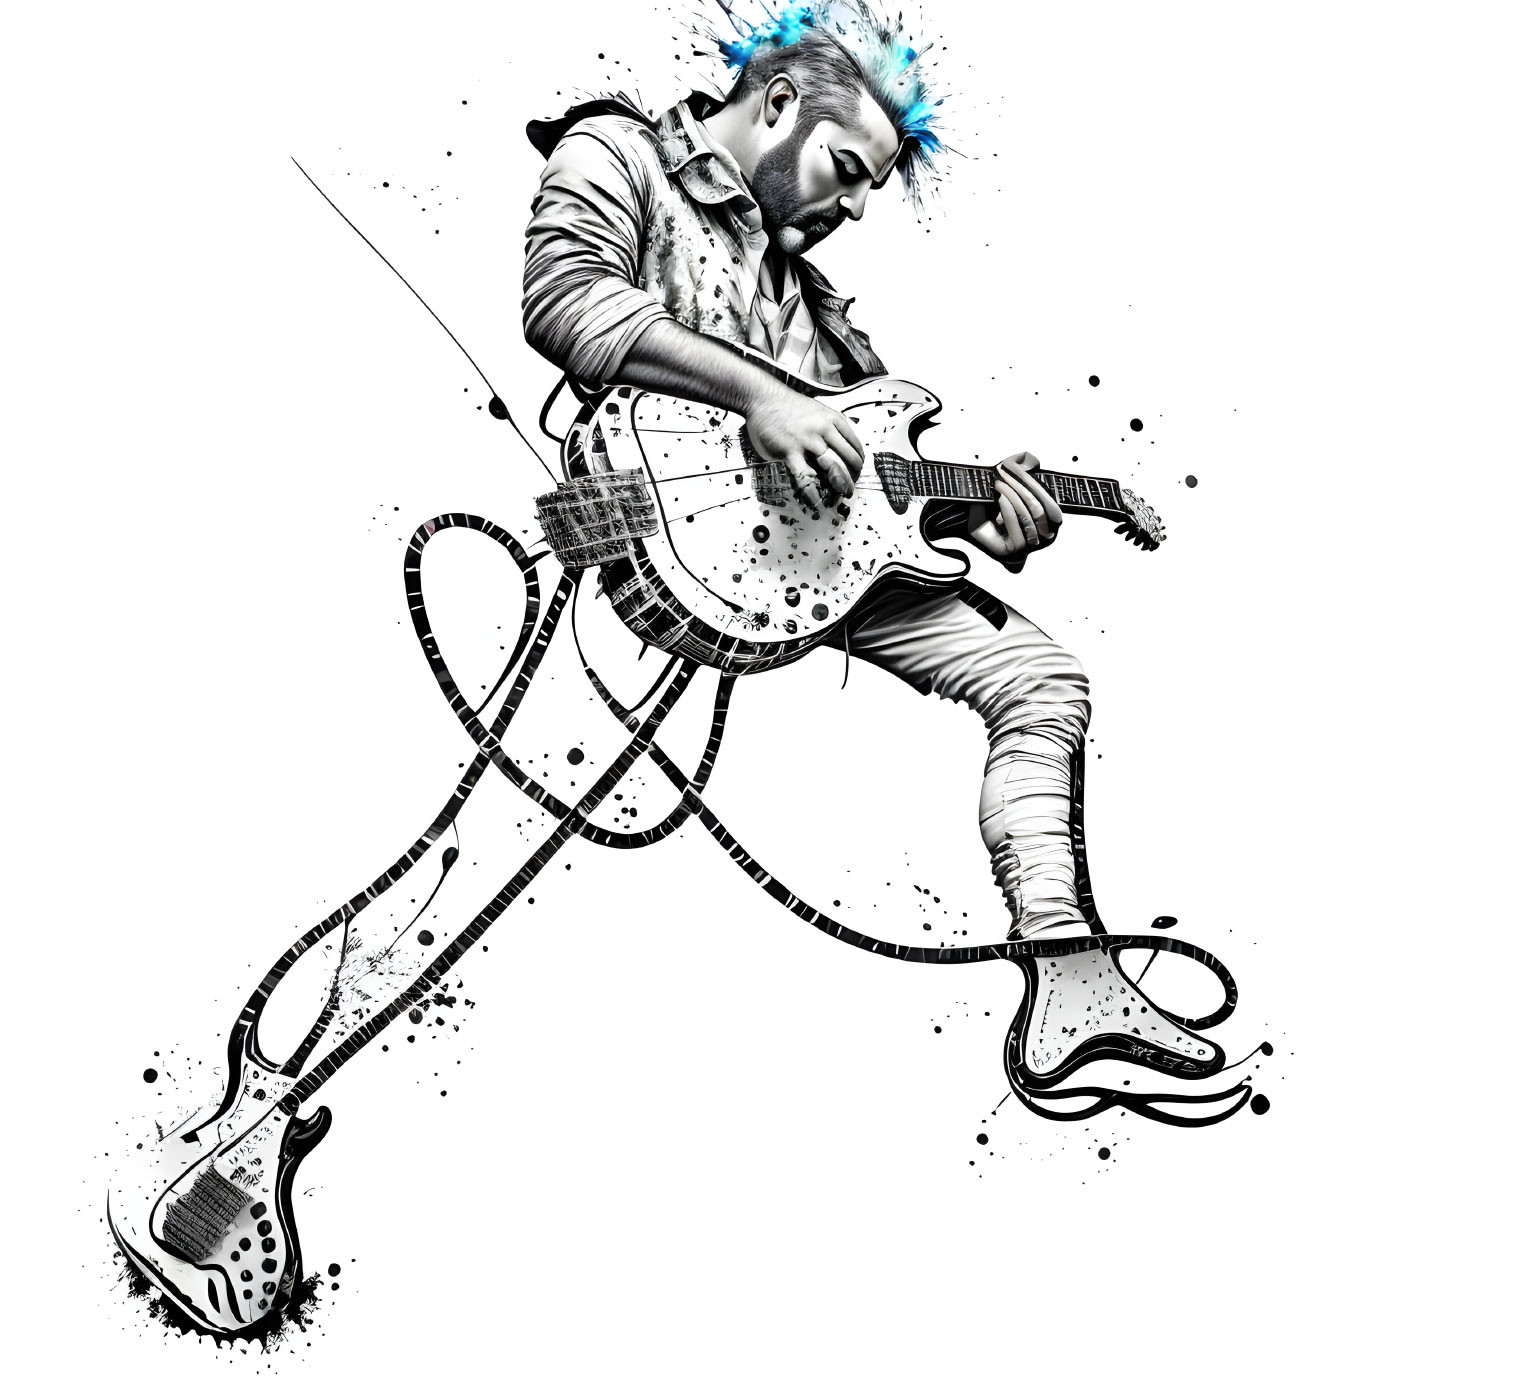 Monochrome image of person with blue mohawk playing guitar